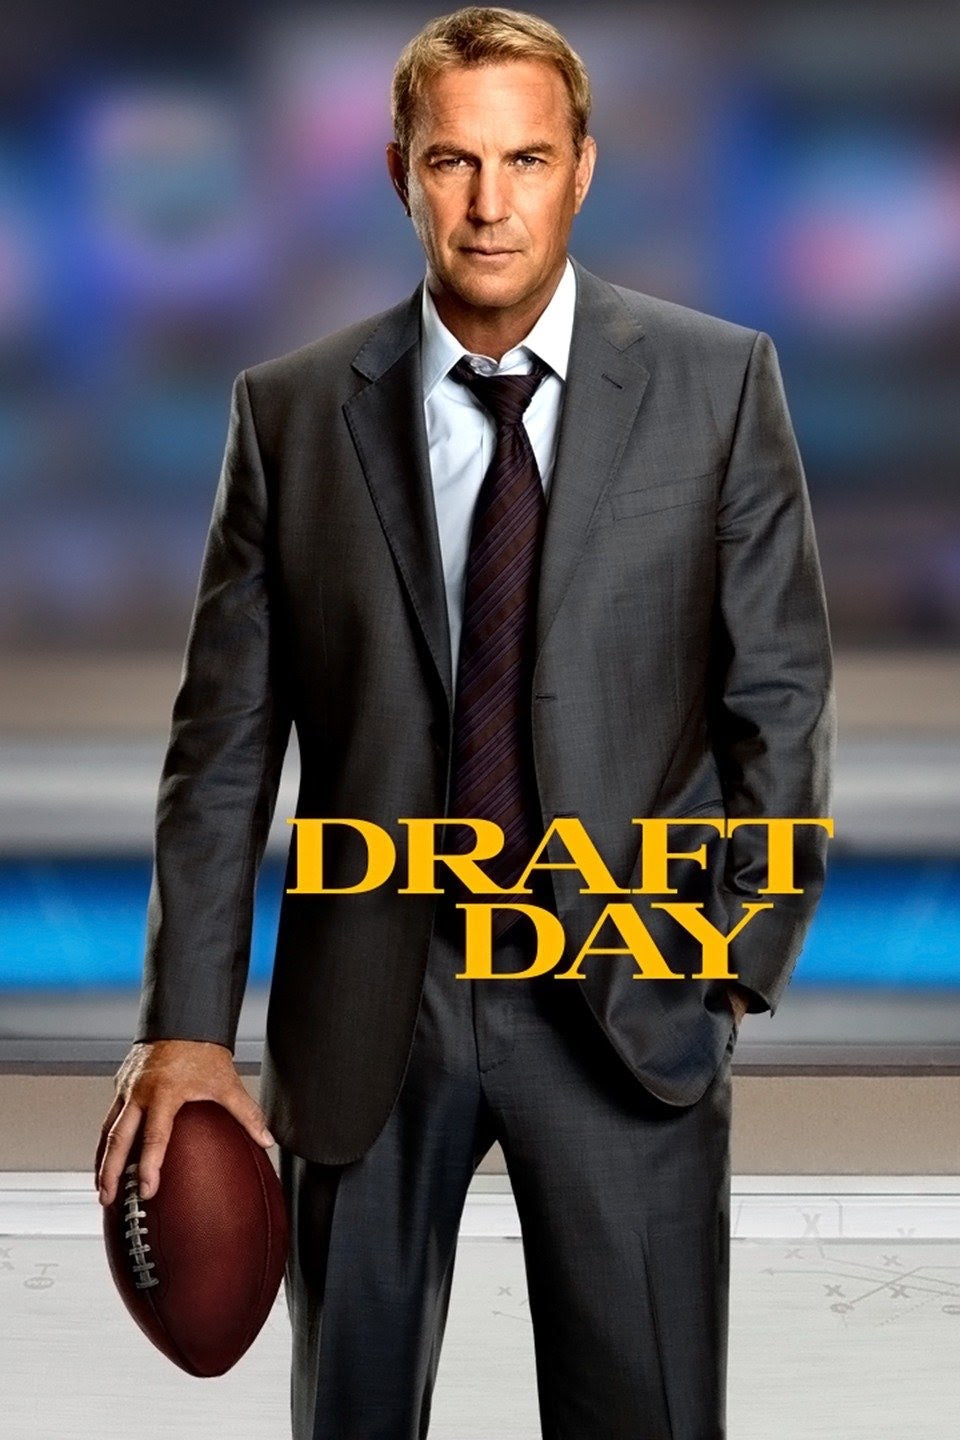 Draft Day (2014) iTunes HD redemption only